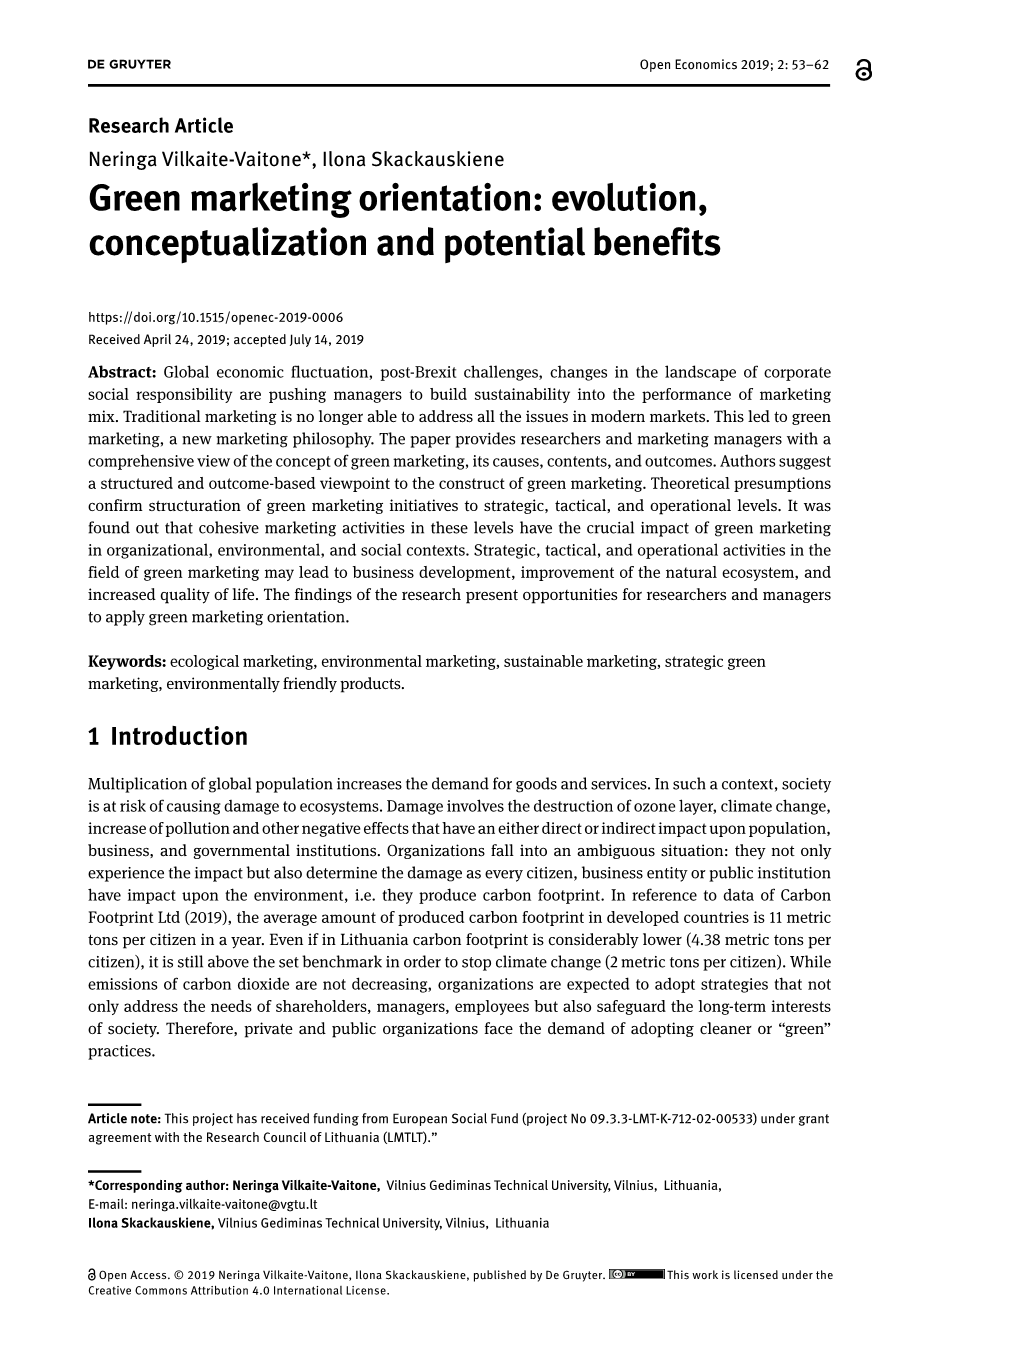 Green Marketing Orientation: Evolution, Conceptualization and Potential Benefits